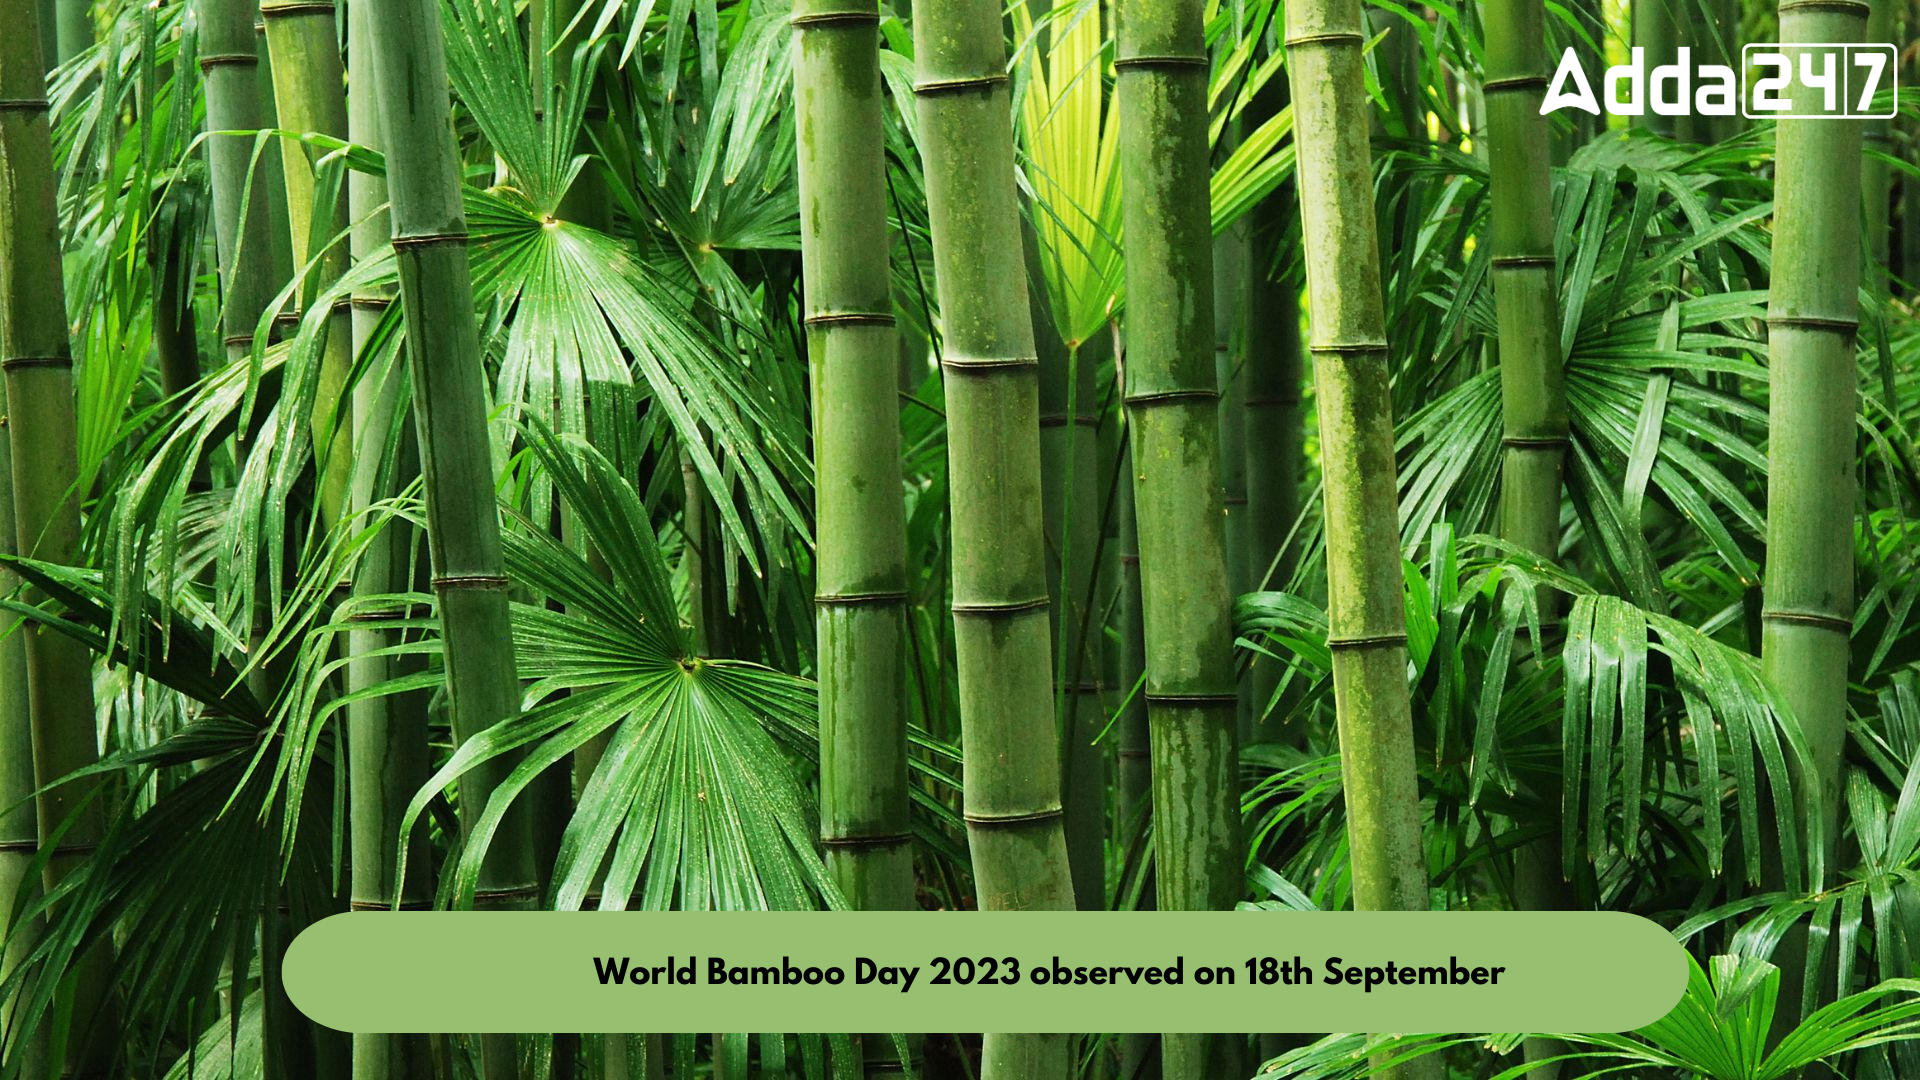 World Bamboo Day 2023 observed on 18th September